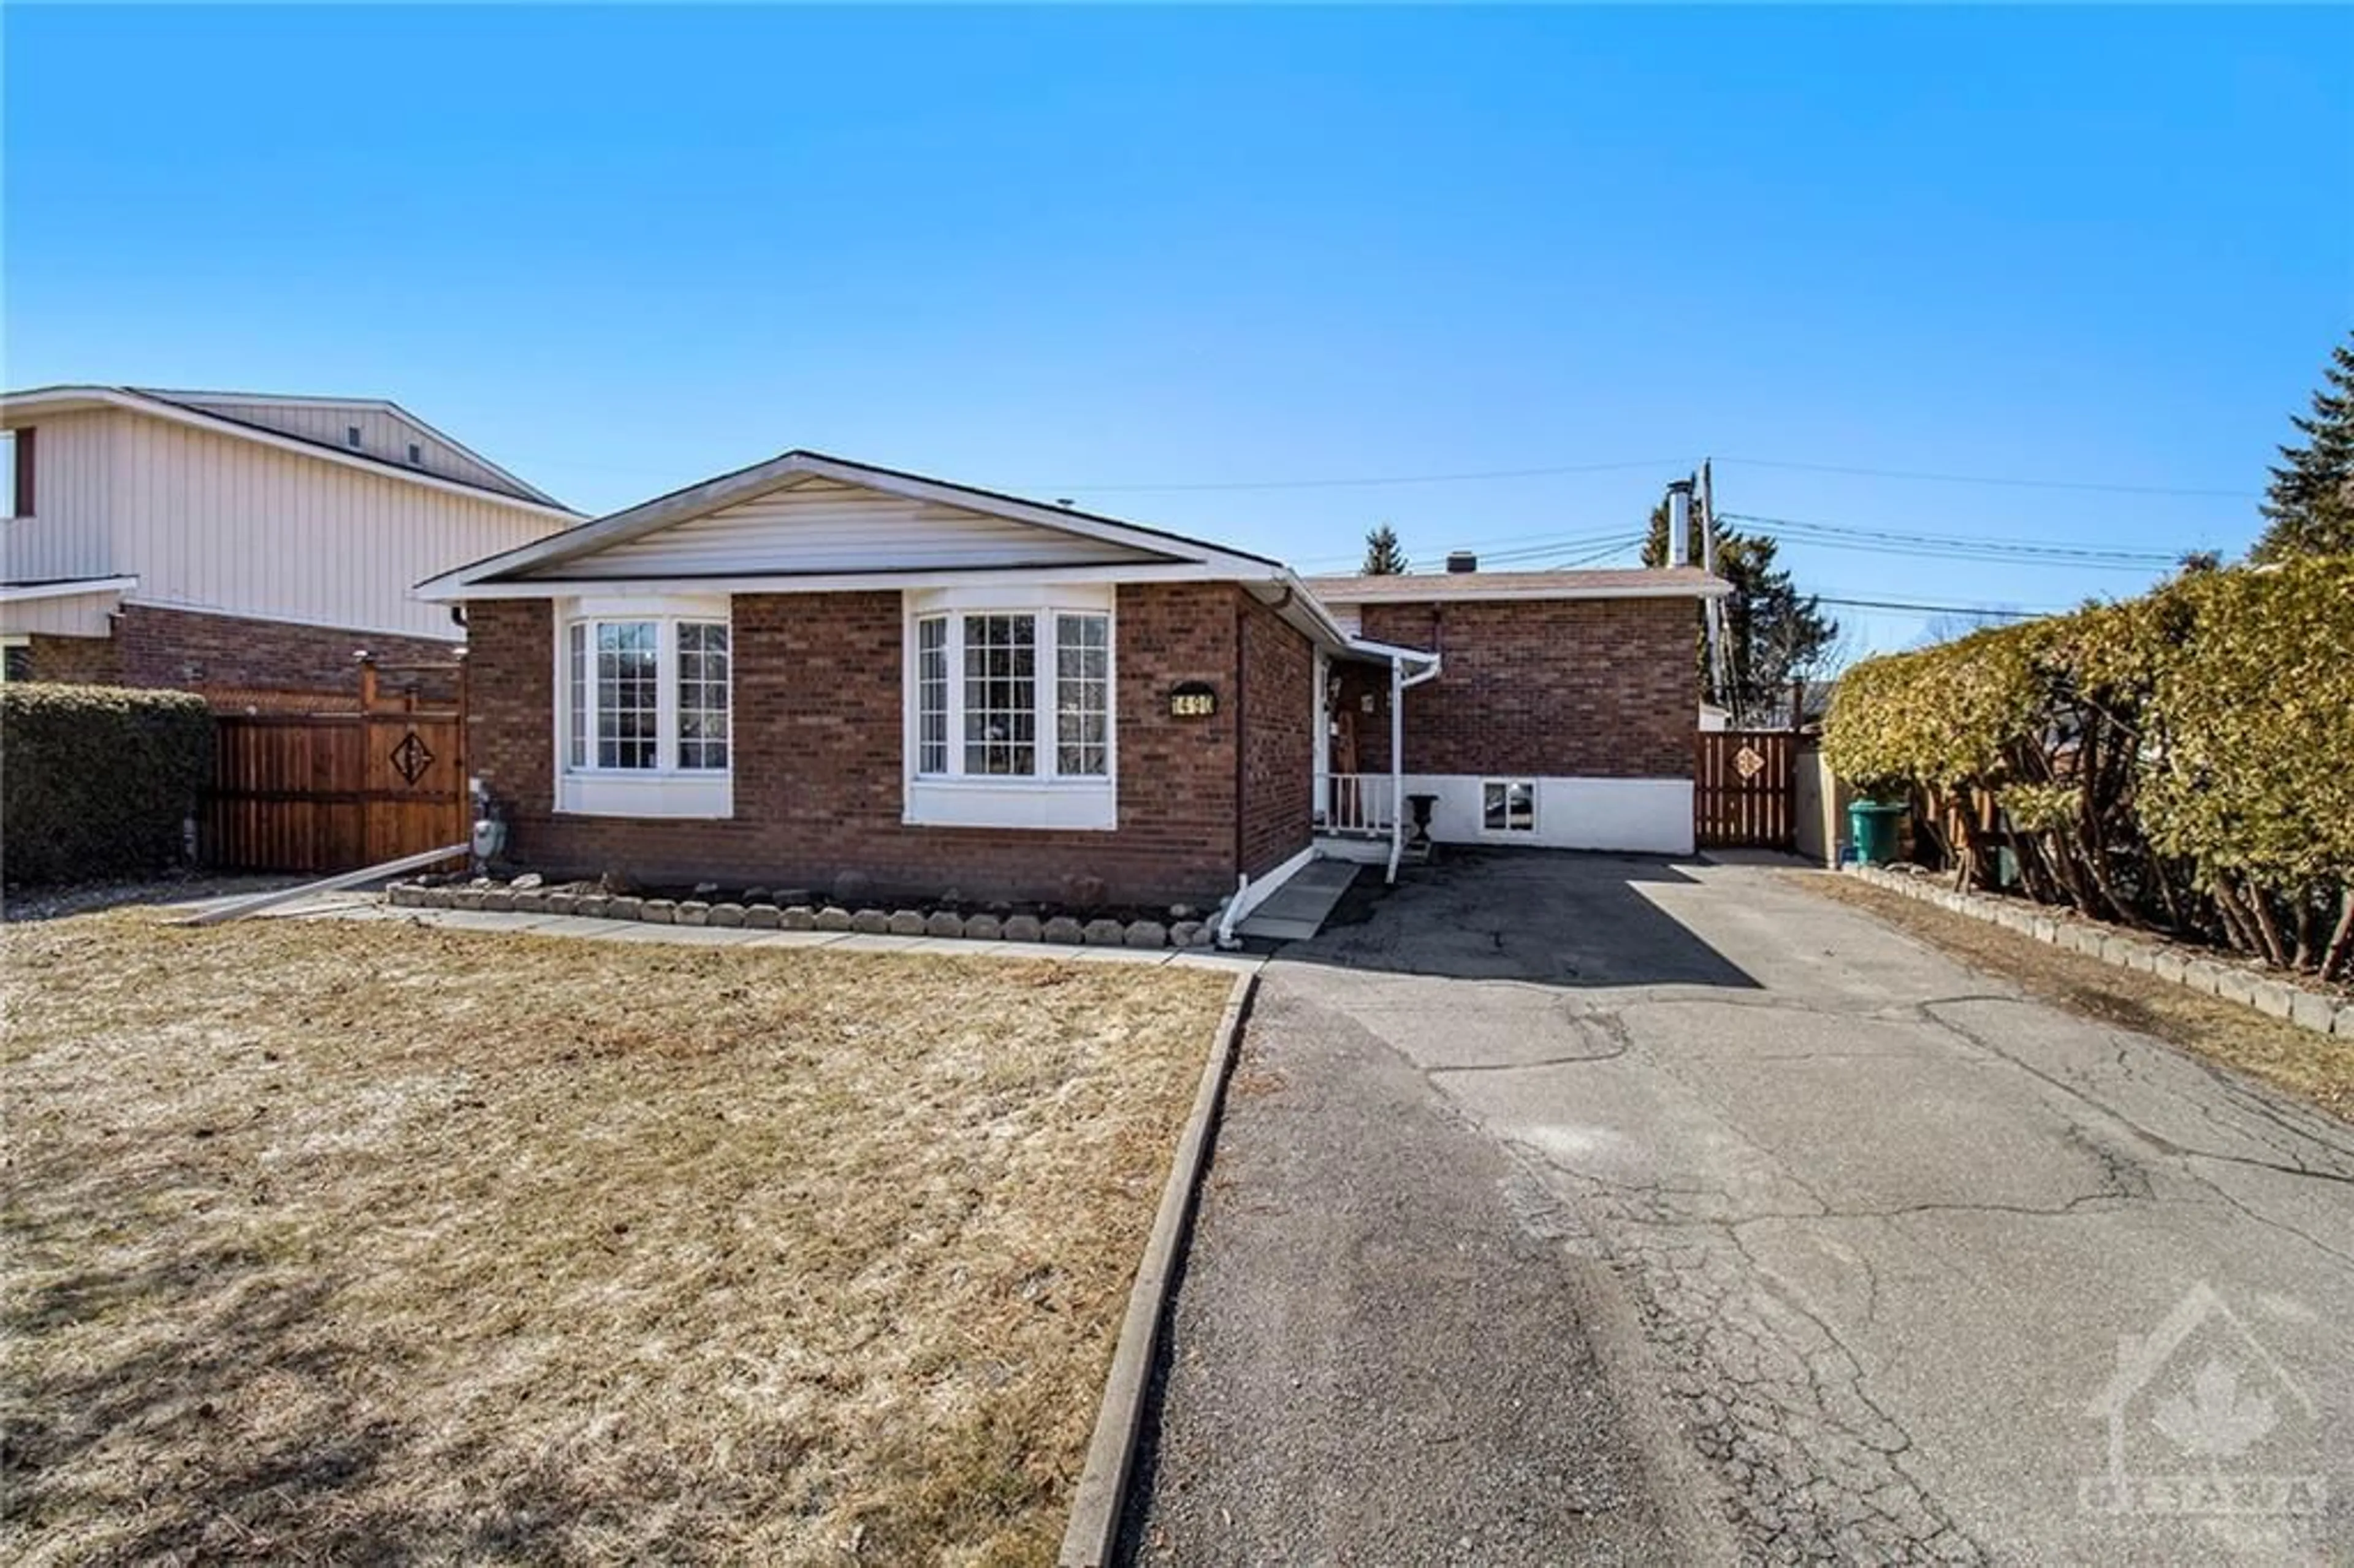 Home with brick exterior material for 1490 TENTH LINE Rd, Ottawa Ontario K1E 2H6